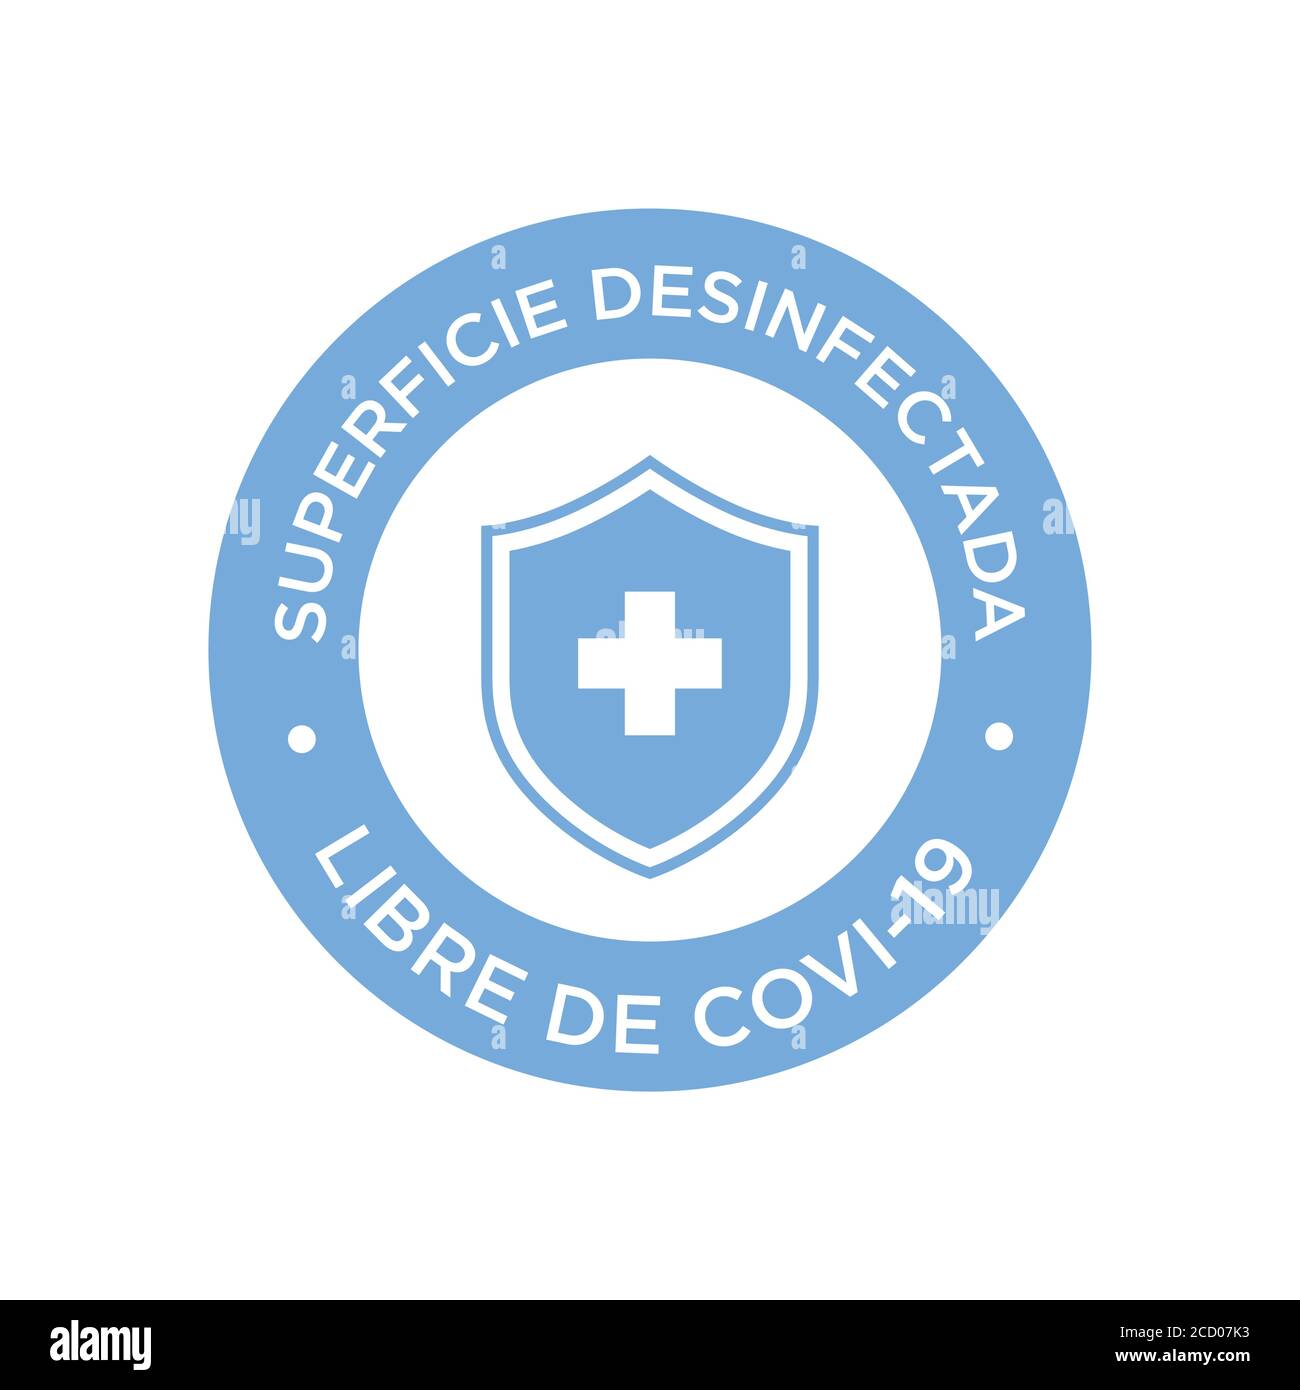 Coronavirus disinfected surface icon written in Spanish. Round symbol for clean areas of Covid-19. Covid free zone. Stock Vector